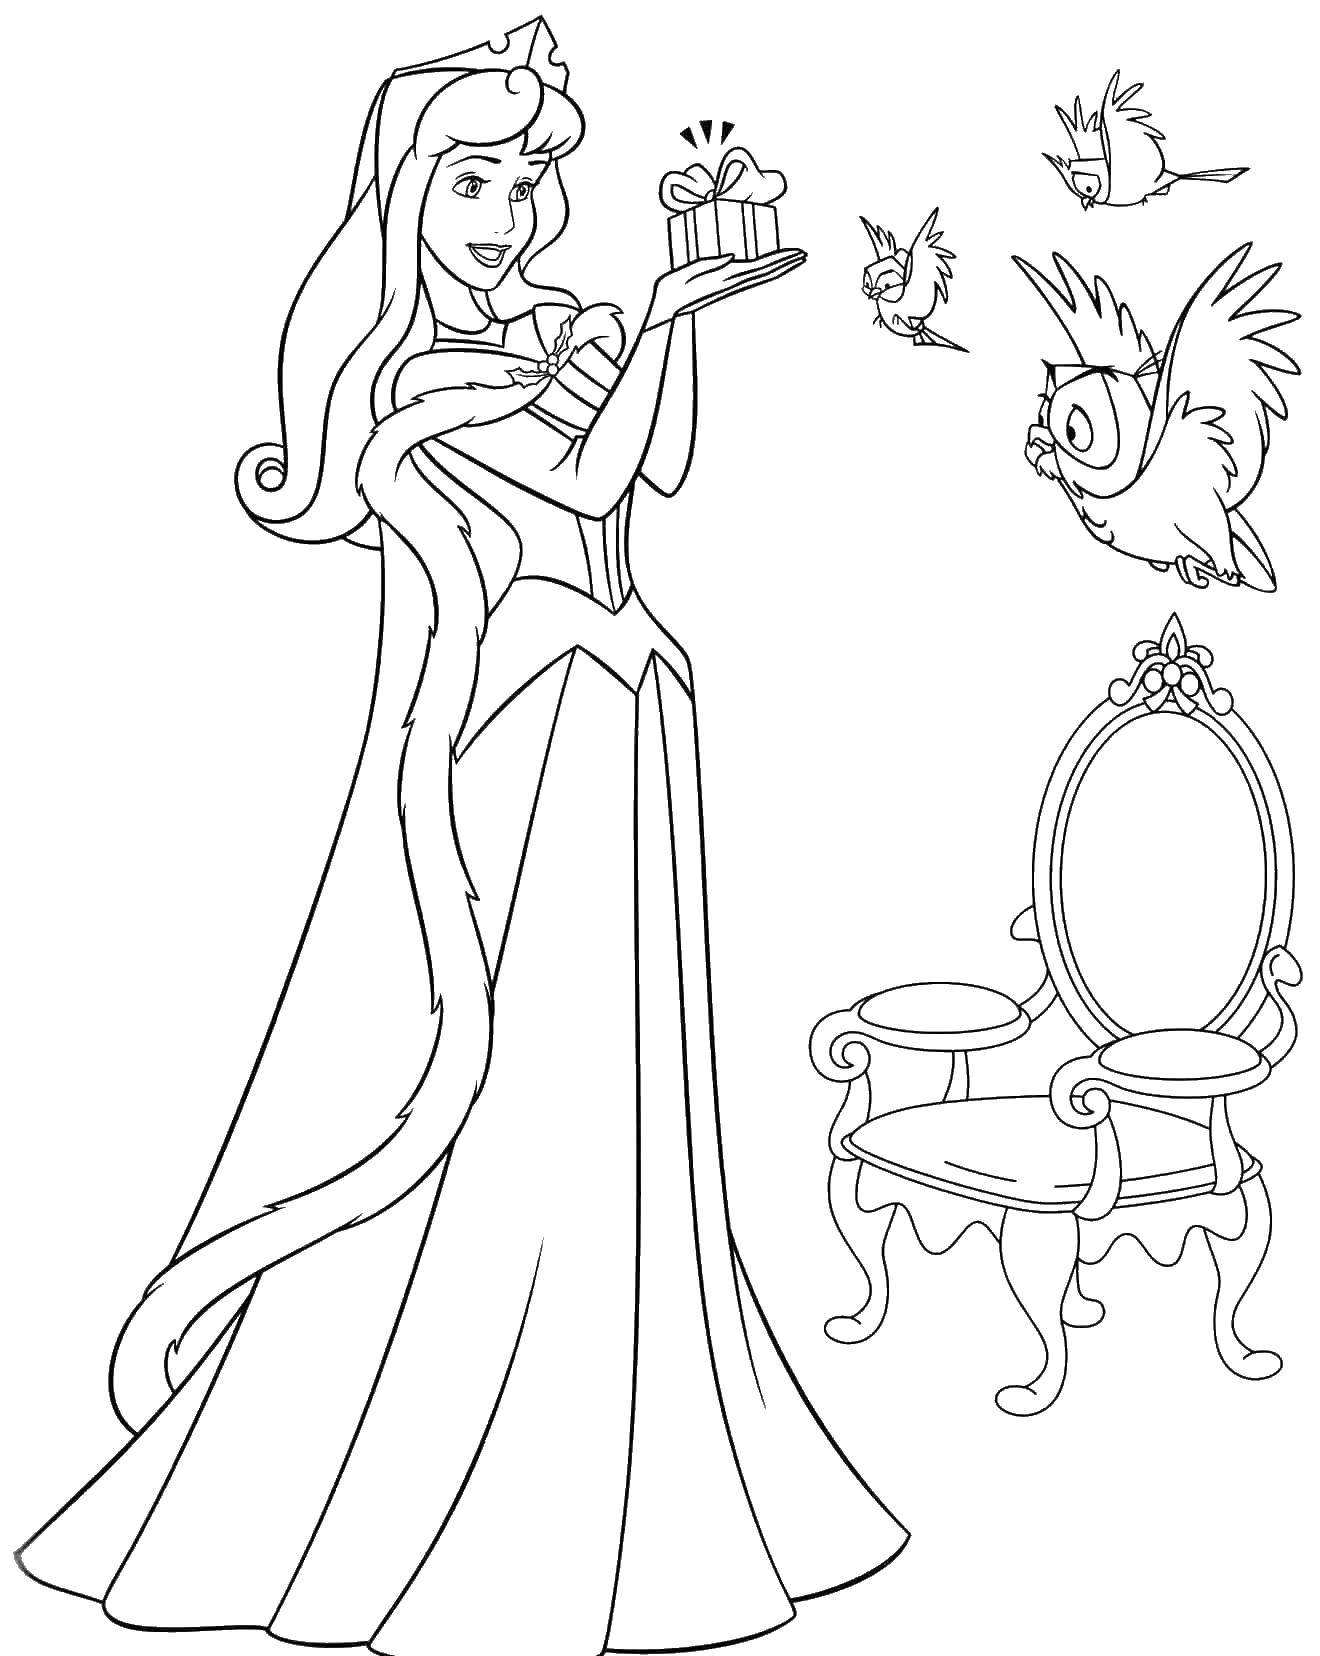 Coloring Princess and the birds. Category Disney cartoons. Tags:  cartoons, princesses, Disney, birds.